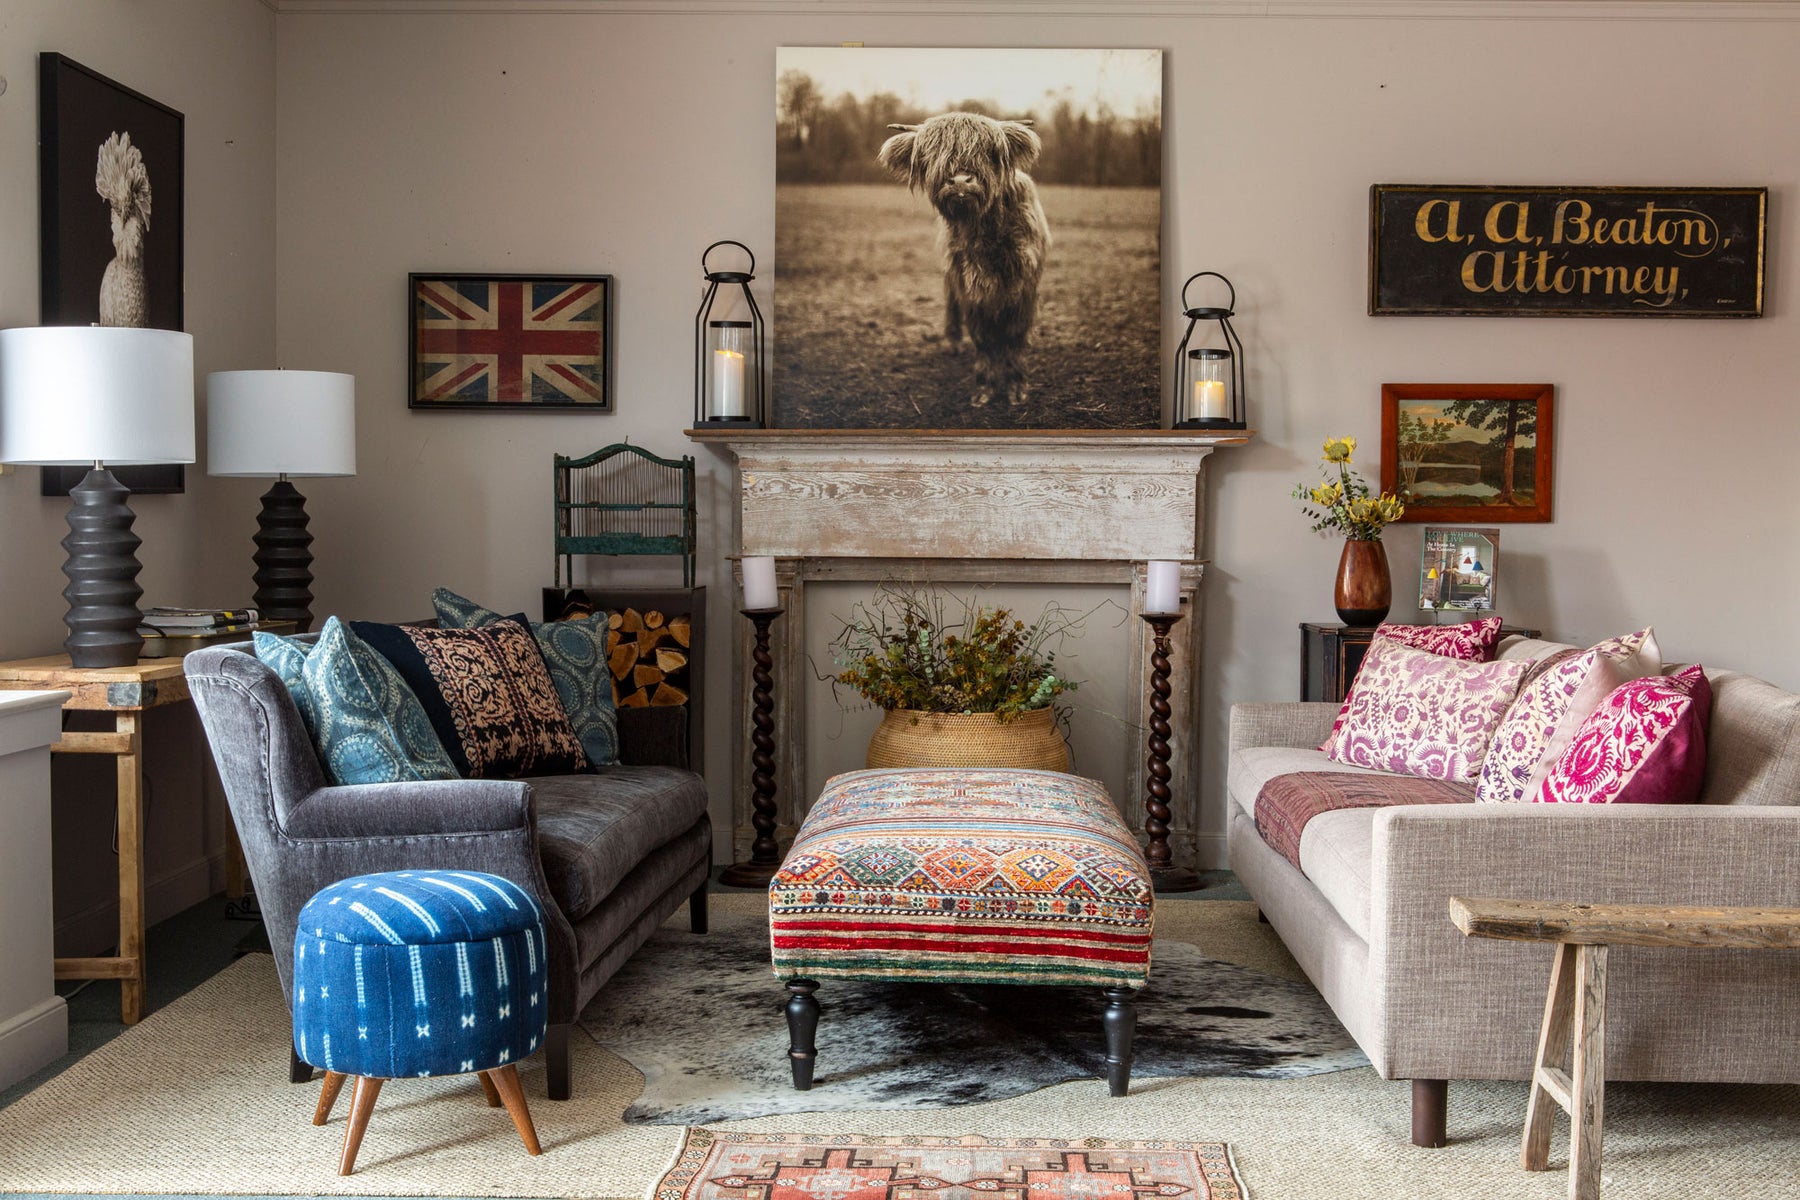 Hammertown location in downtown Rhinebeck, NY | Styled living room with comfortable vintage furniture and ottomans